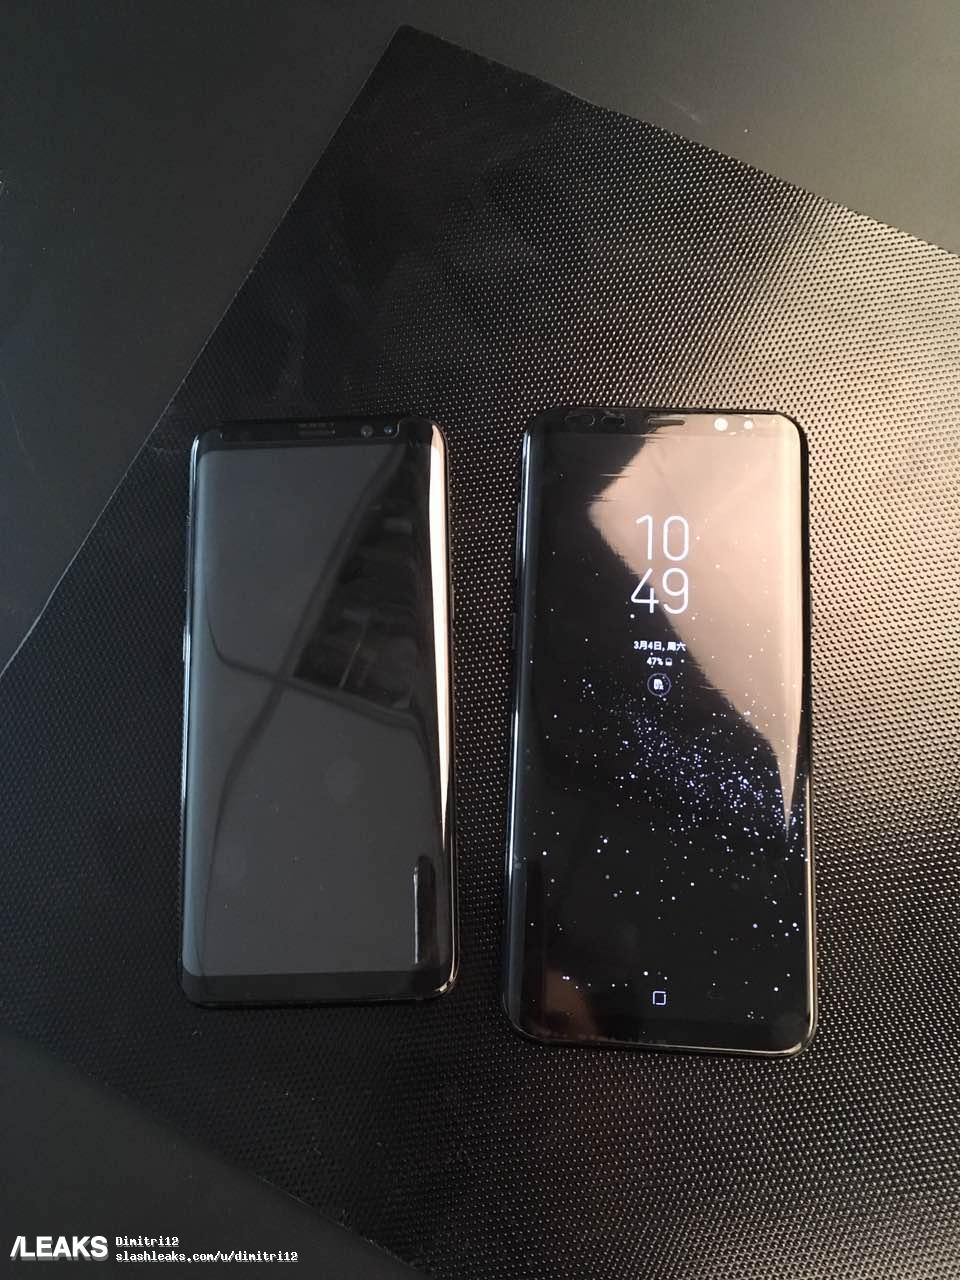 samsung galaxy s8 and galaxy s8 plus leak side by side revealing difference in size 513640 2